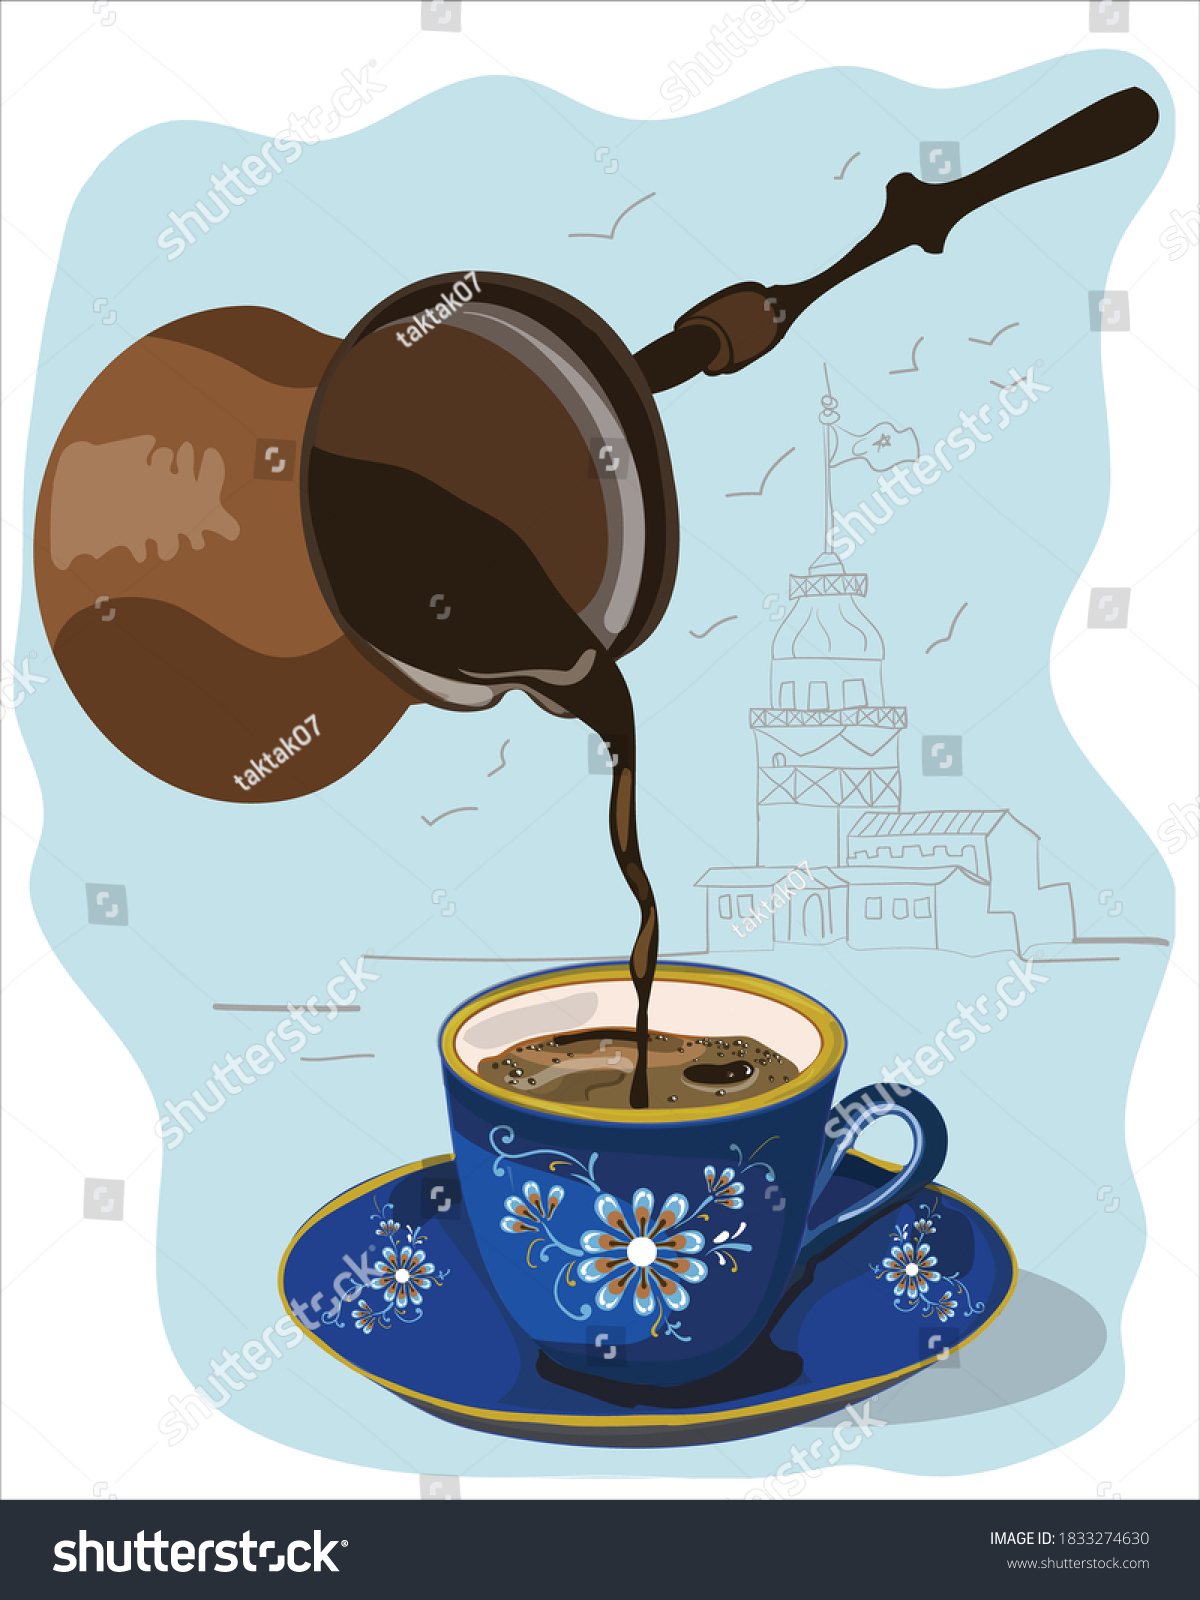 SVG of 
traditional turkish coffee and coffee pot
background maiden tower vector illustration svg